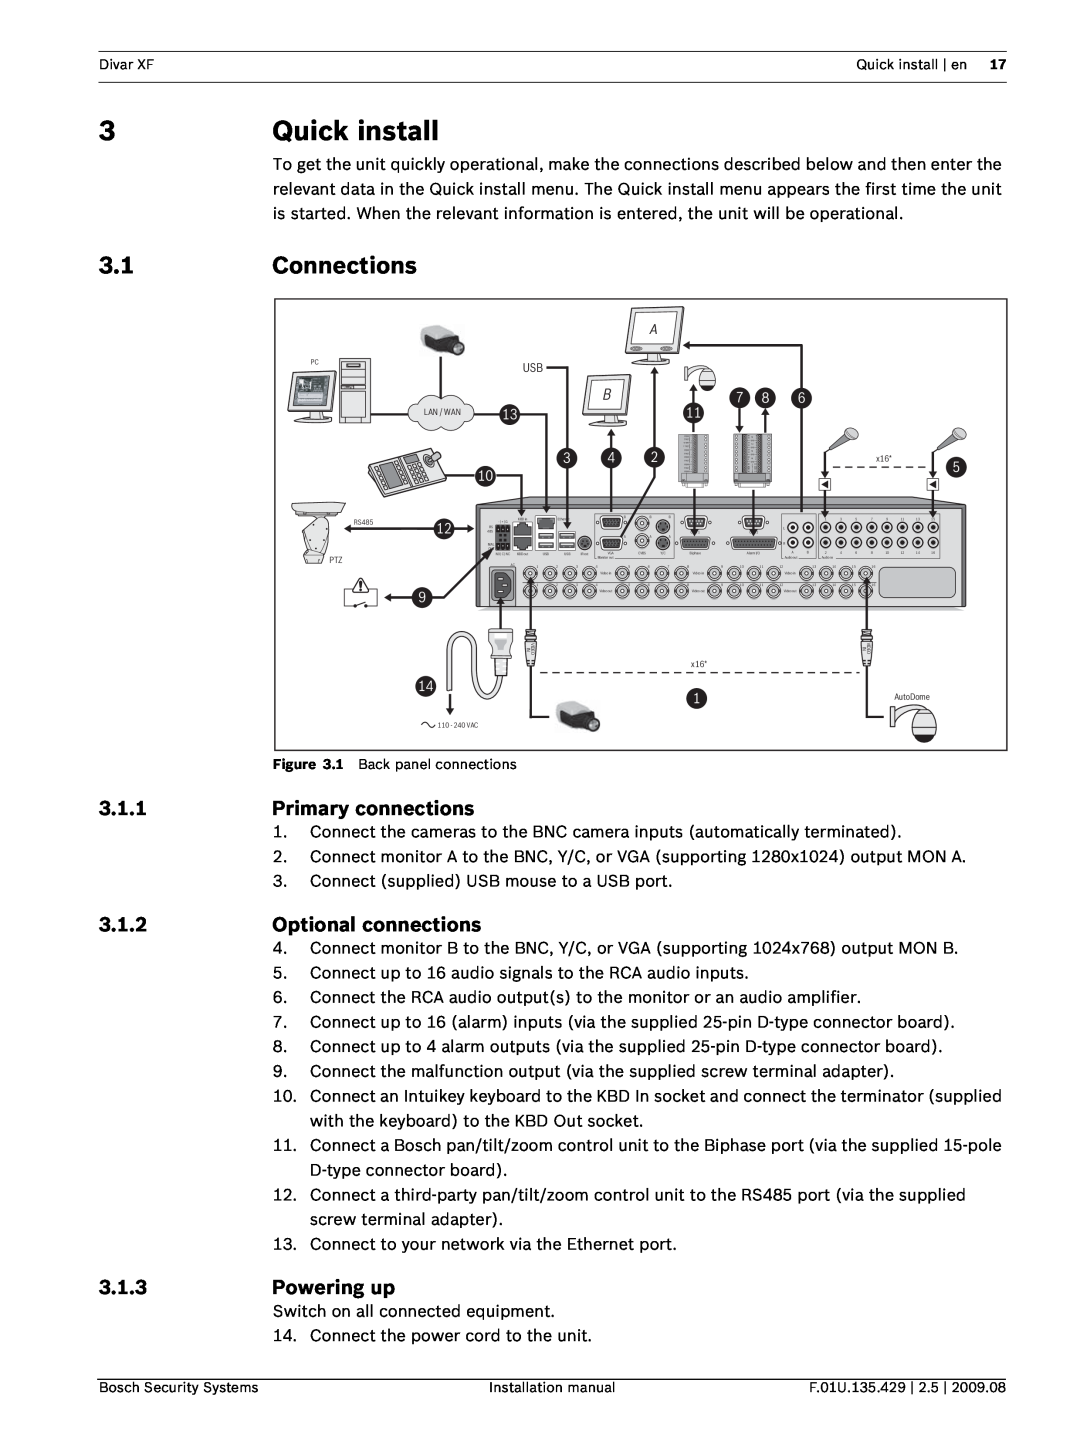 Bosch Appliances XF installation manual Quick install, Connections, Primary connections, Optional connections, Powering up 